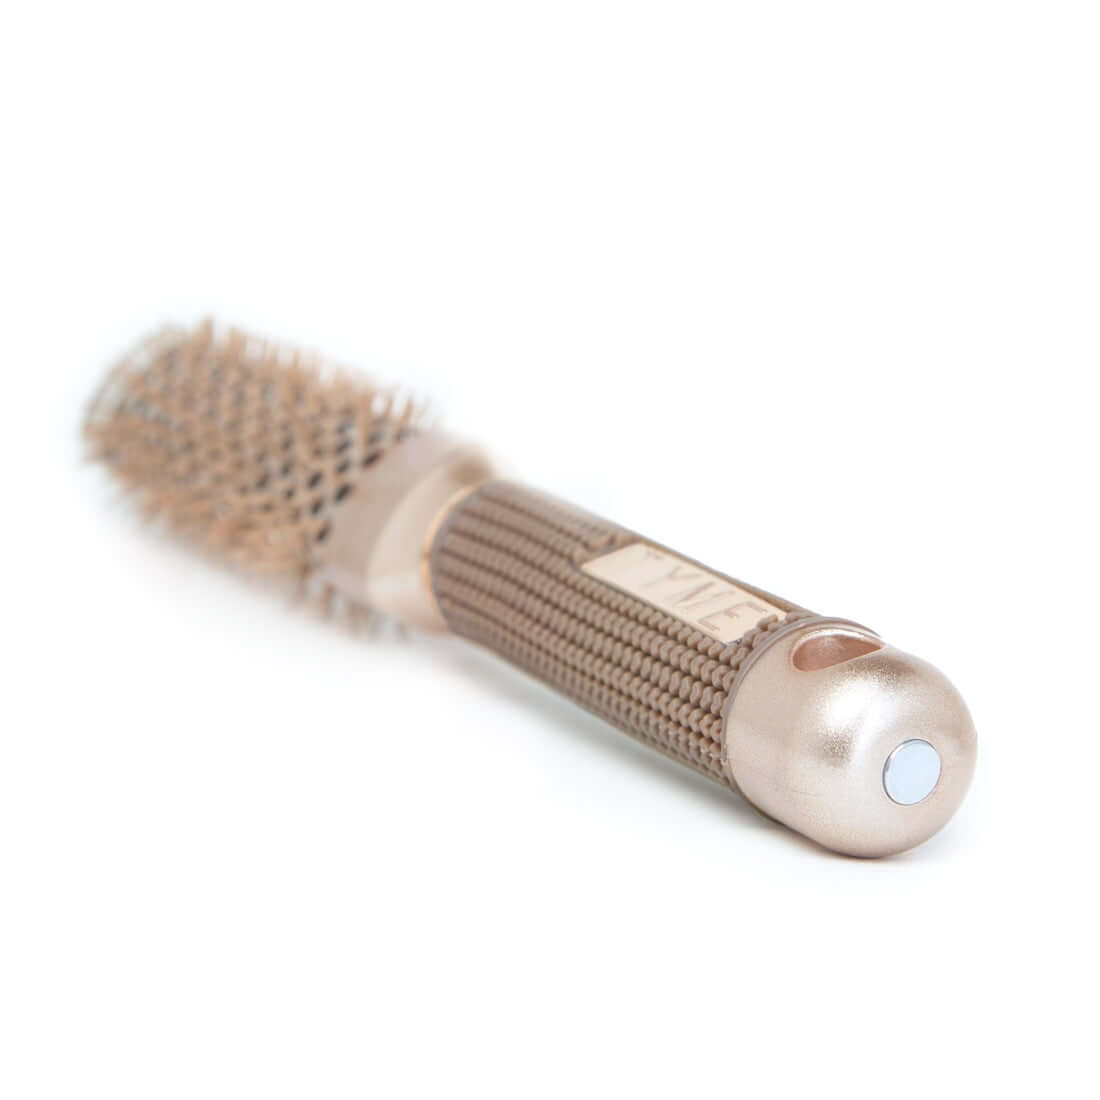 End of handle on TYME Triangle Hair Brush showing hole for hook storage and magnet for alternative storage.